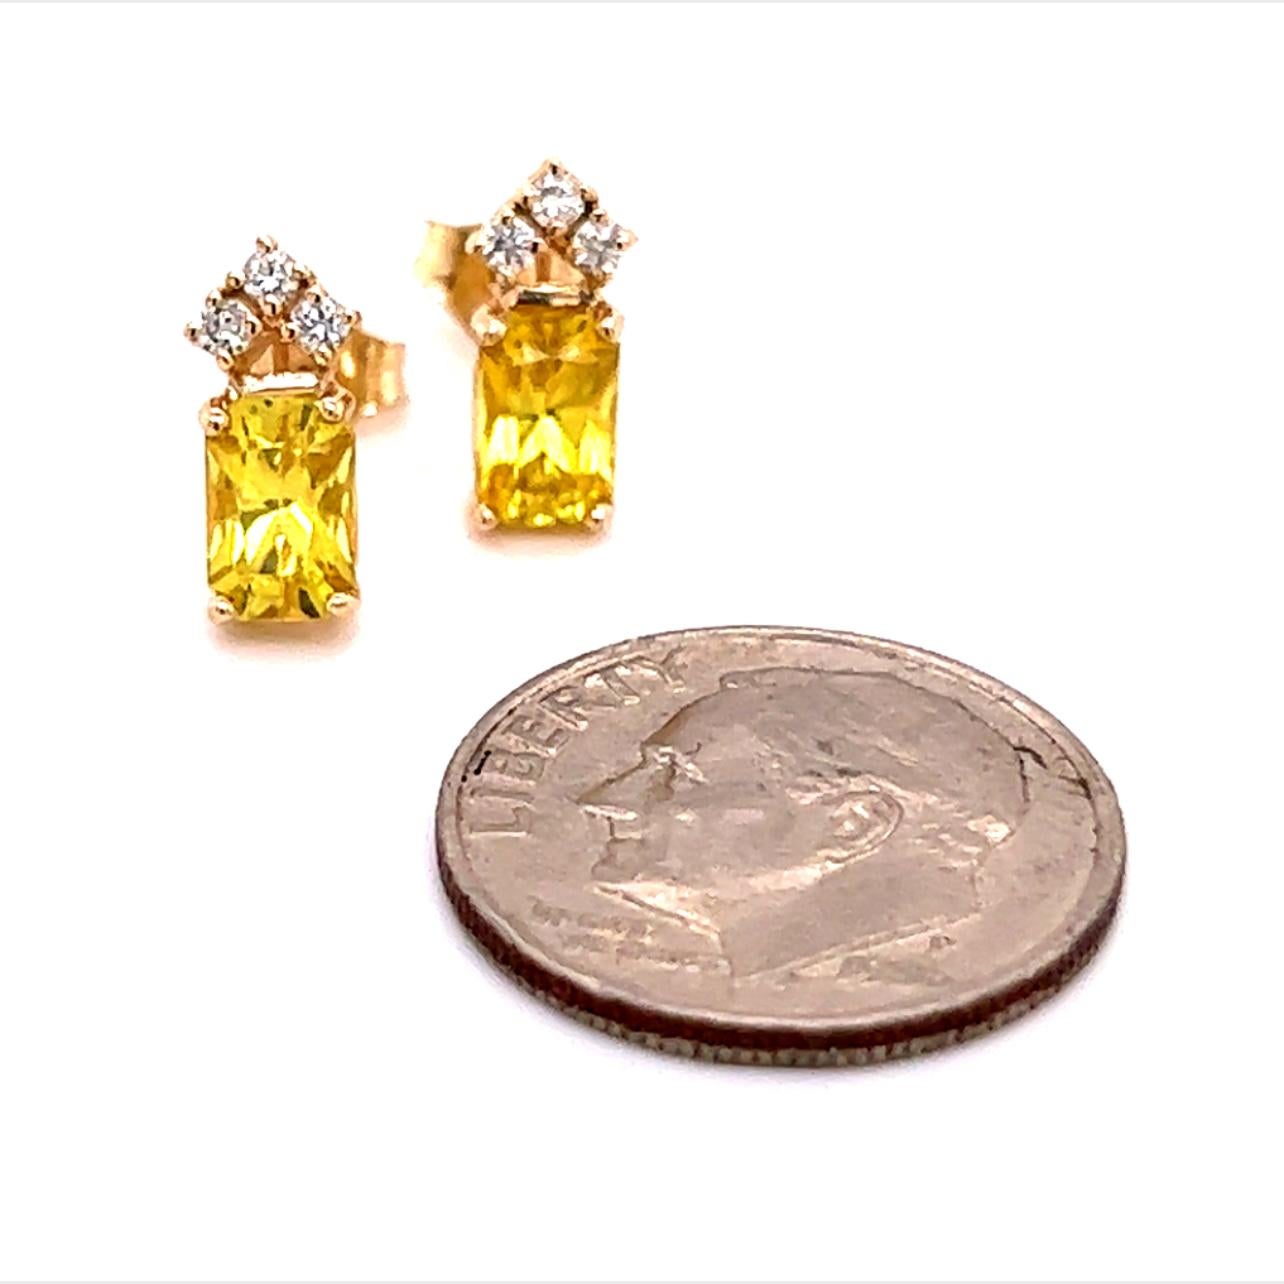 Brilliant Cut Natural Sapphire Diamond Earrings 14k Gold 1.74 TCW Certified For Sale